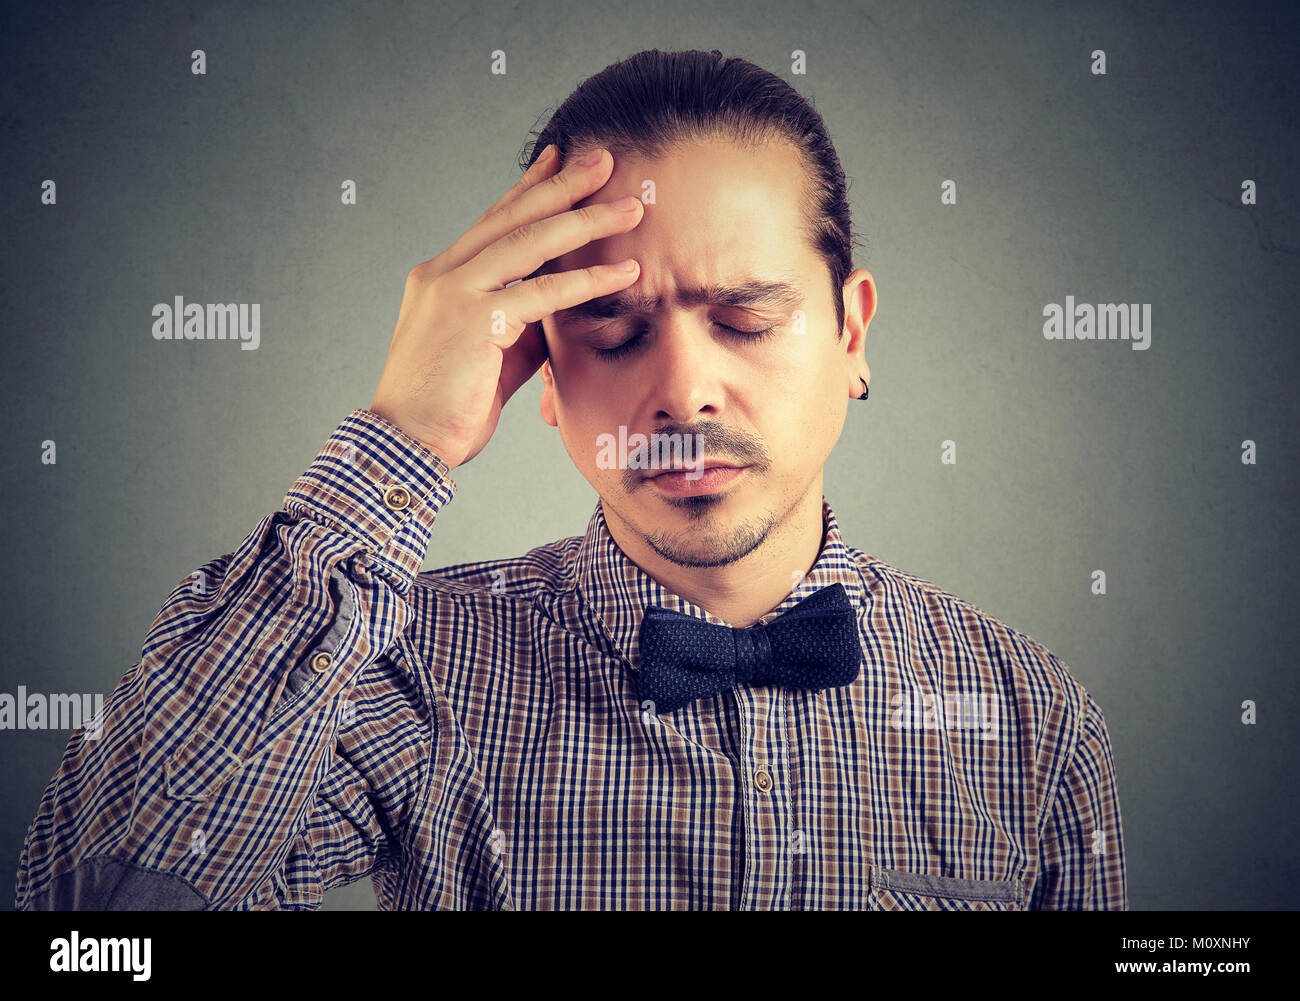 Young elegant man rubbing head having expression of pain and street. Stock Photo